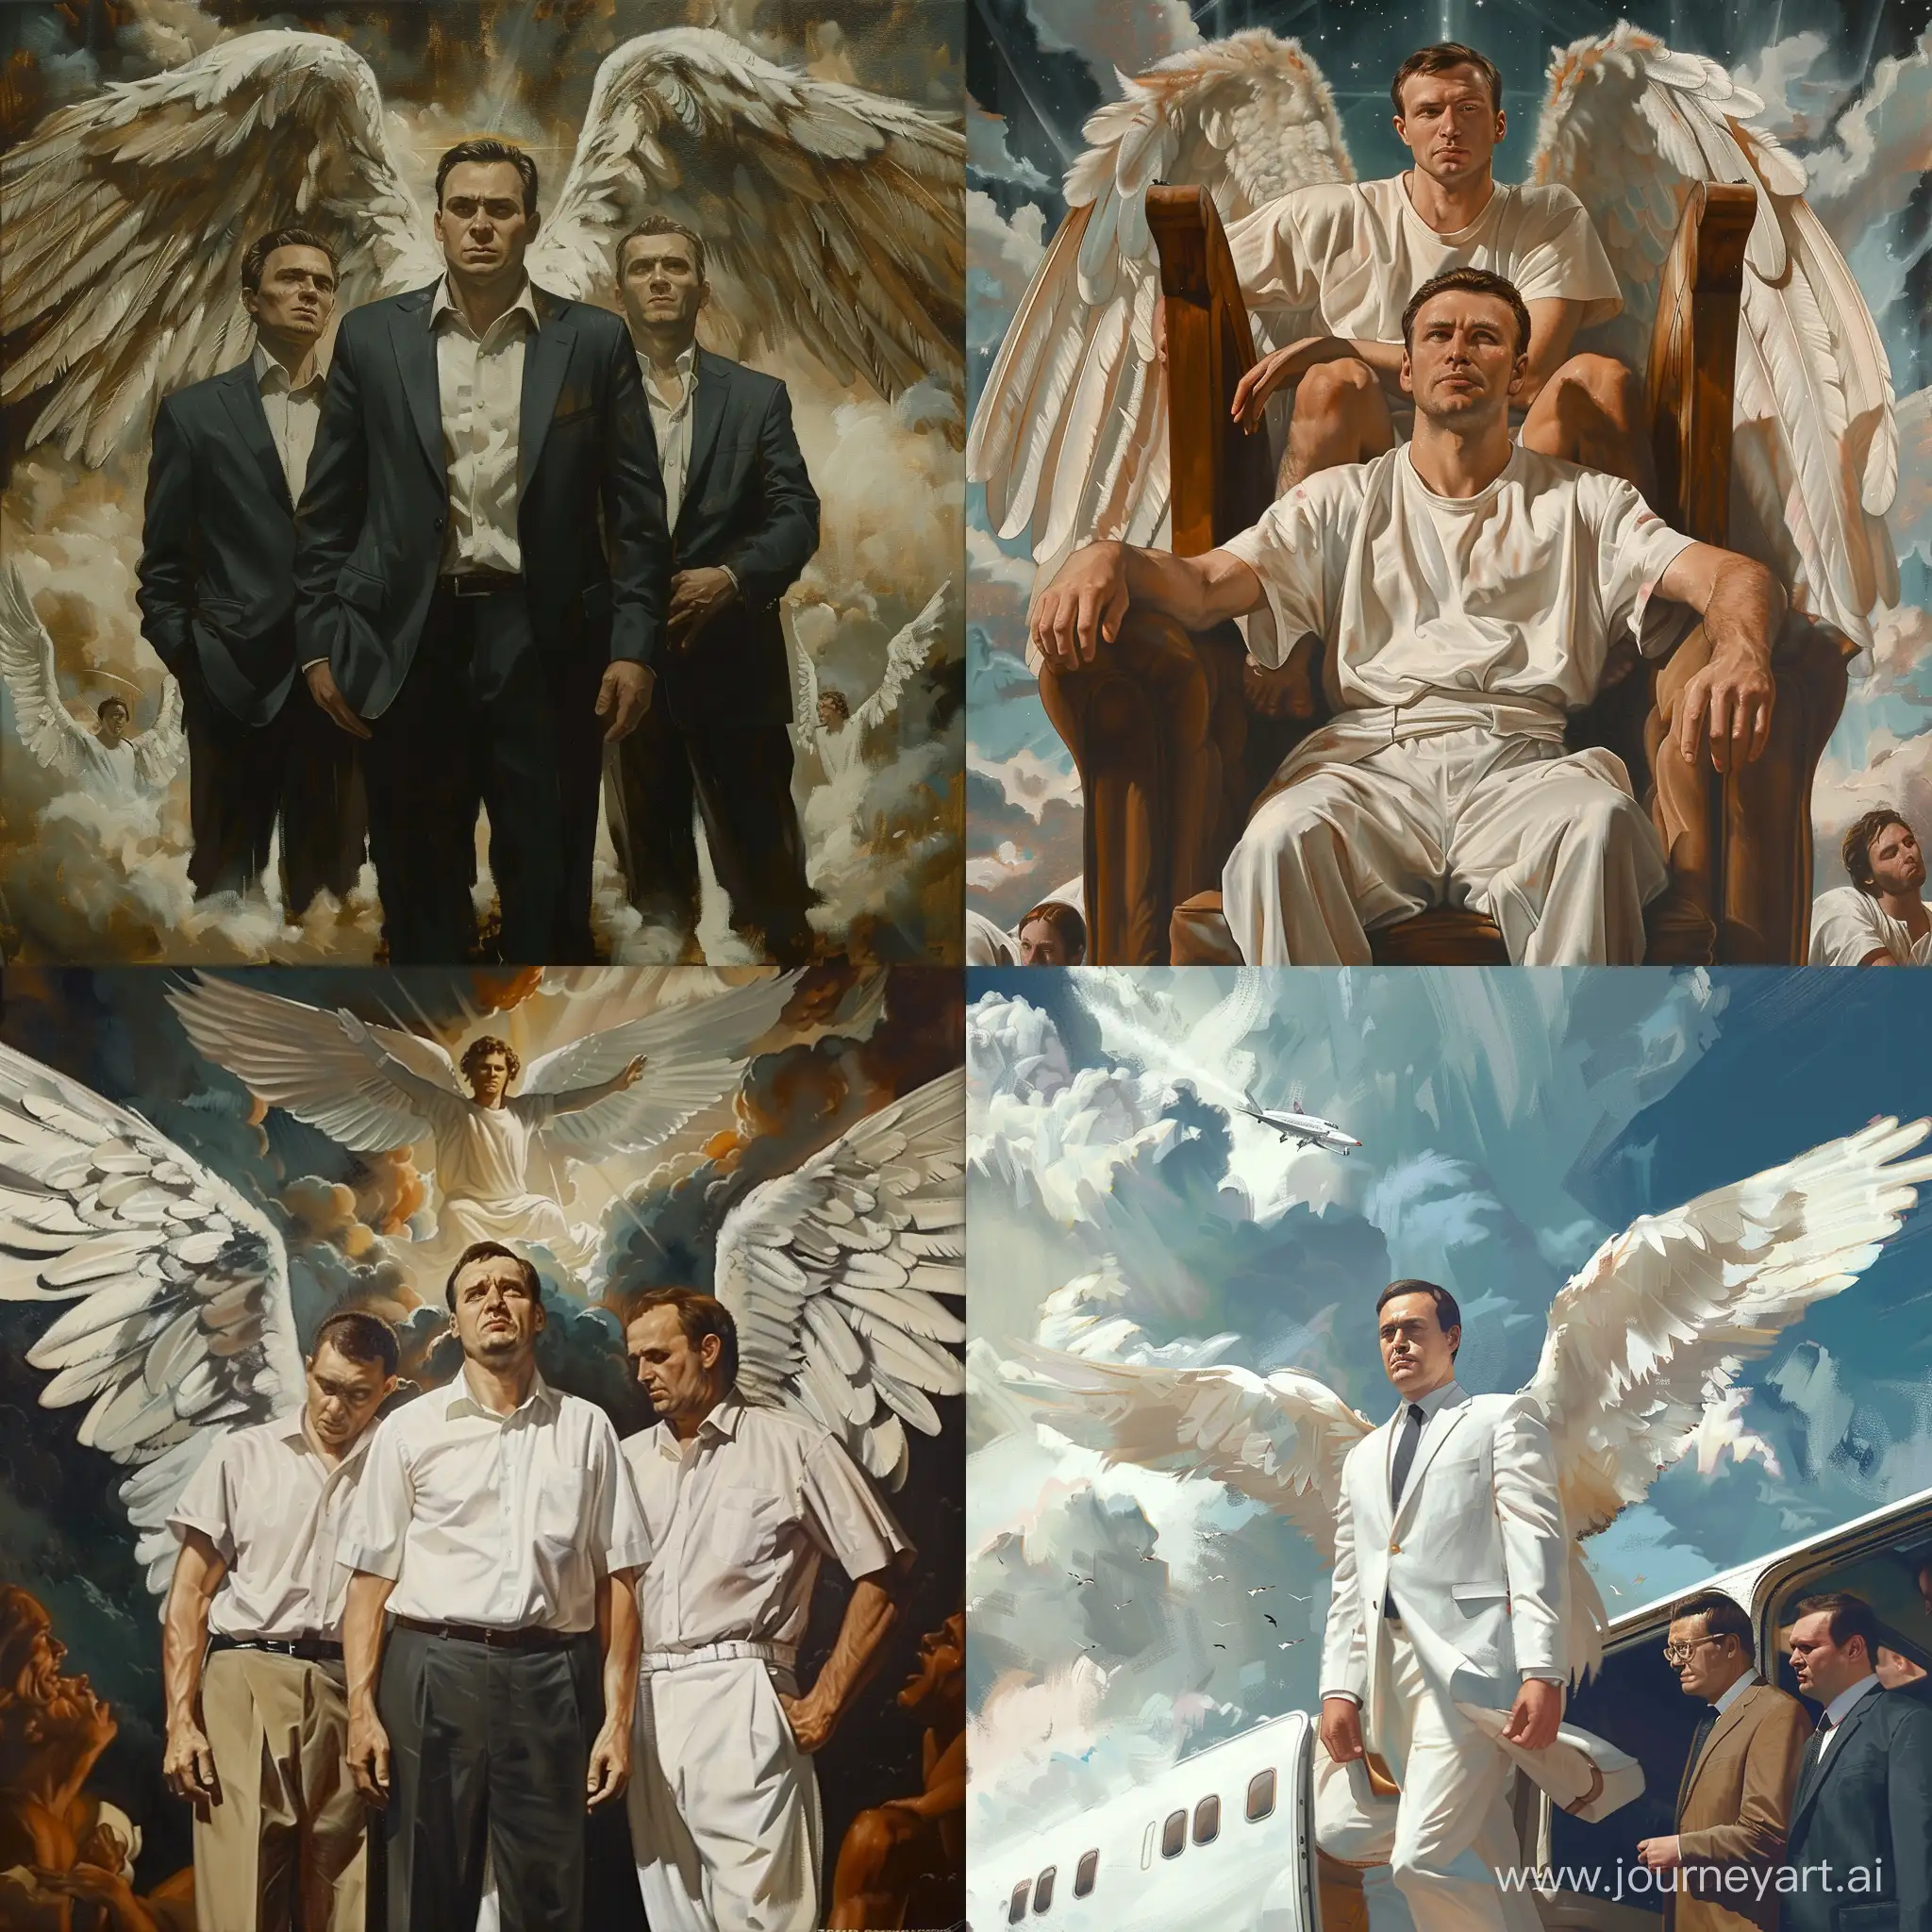 Alexey Navalny in the form of an angel is in heaven with Maxim Martsinkevich and Nemtsov